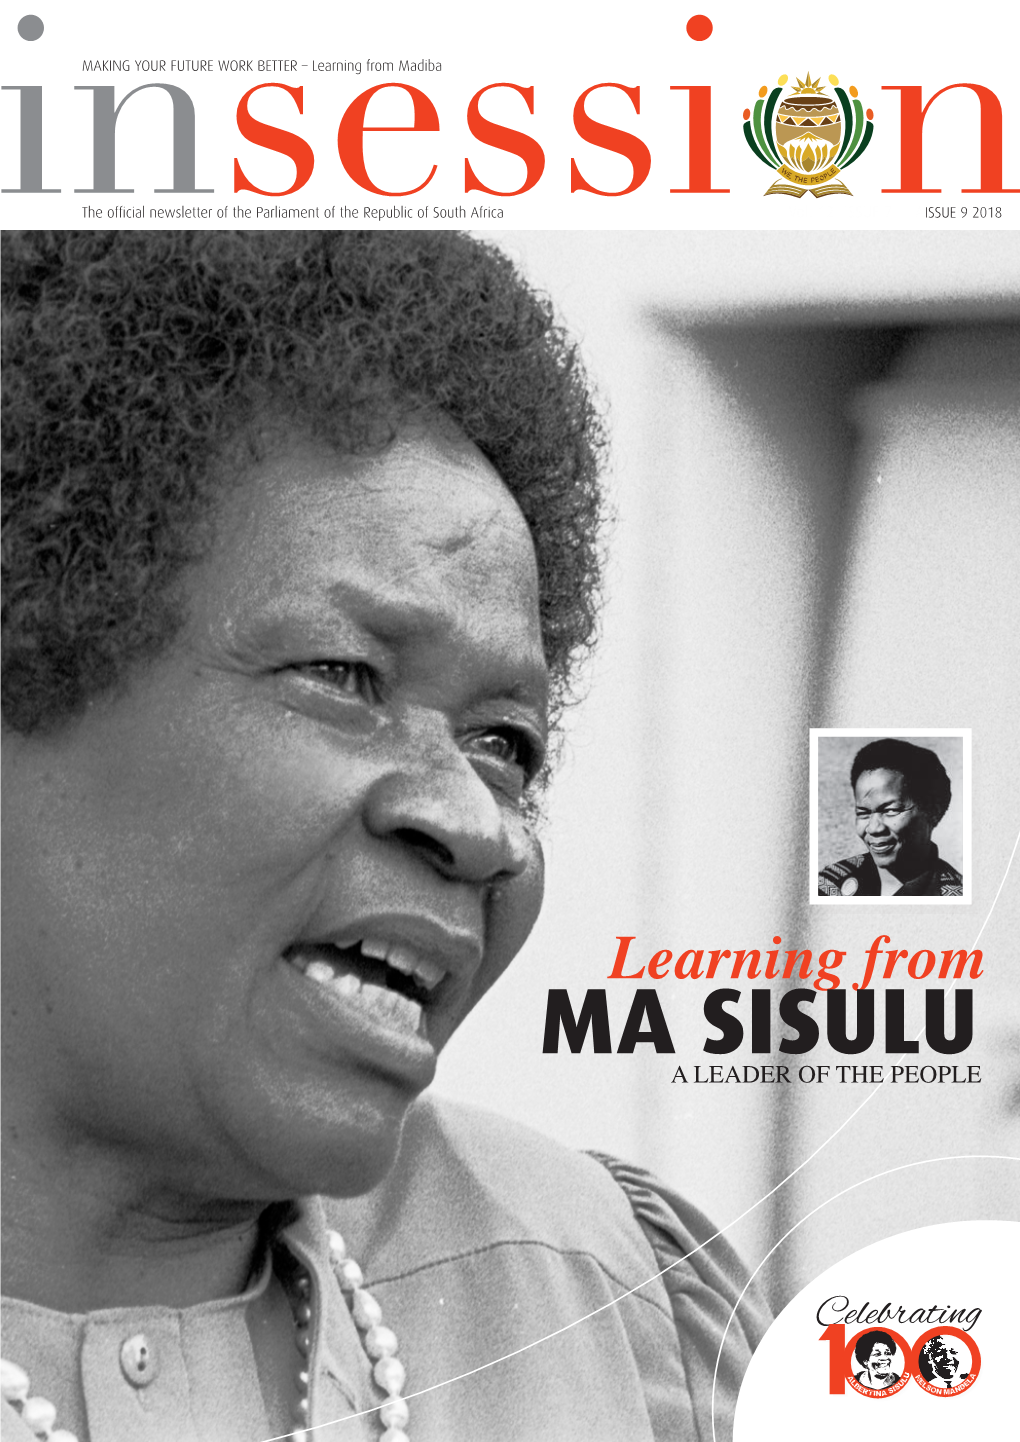 MA SISULU a LEADER of the PEOPLE Vision